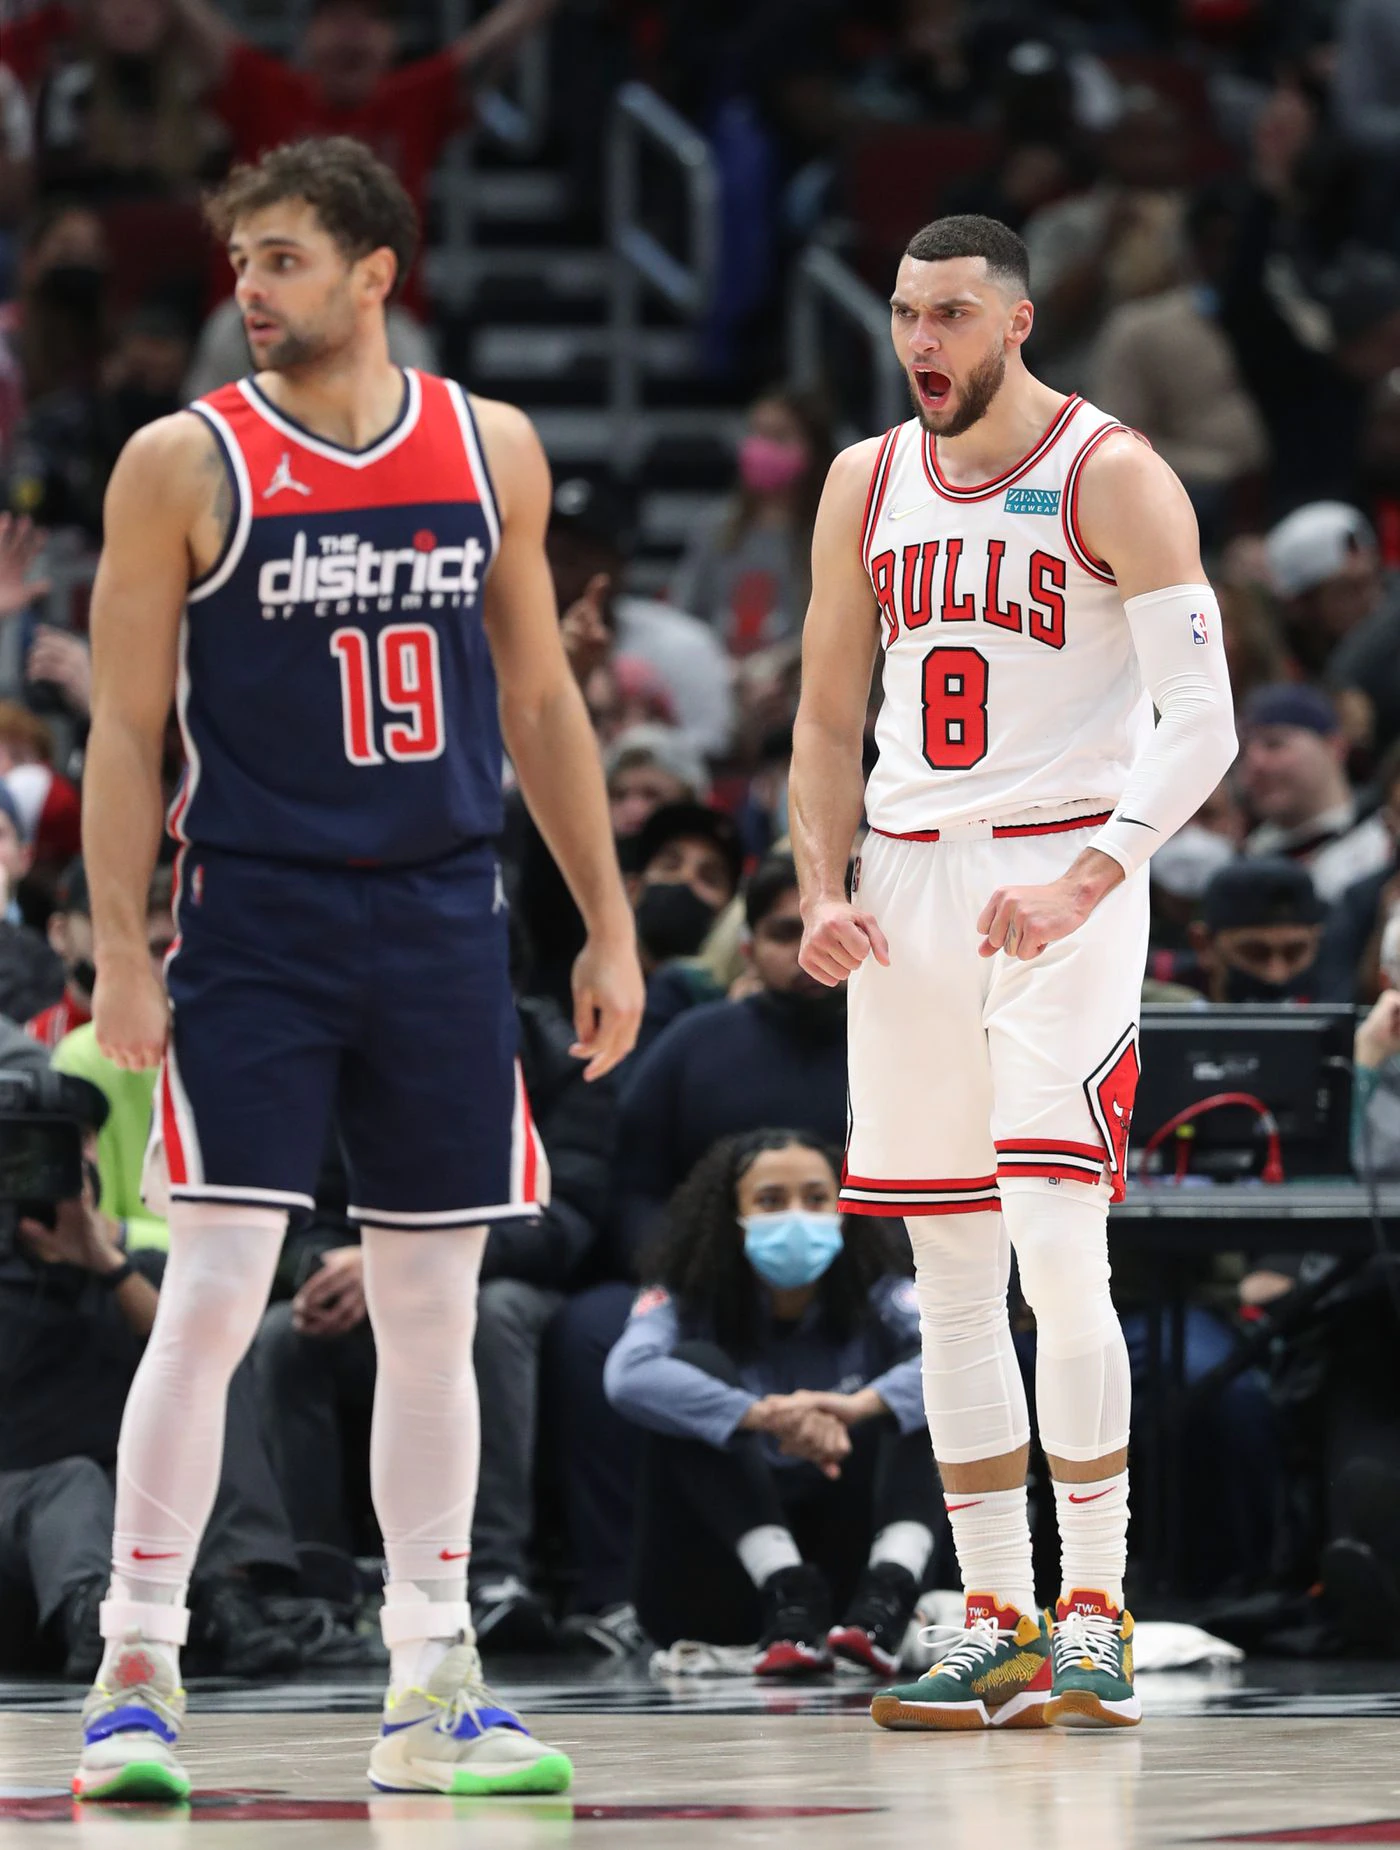 Chicago Bulls guard Zach LaVine (8) yells after making a basket and drawing a foul in the third quarter against the Washington Wizards at United Center on Jan. 7, 2022, in Chicago.